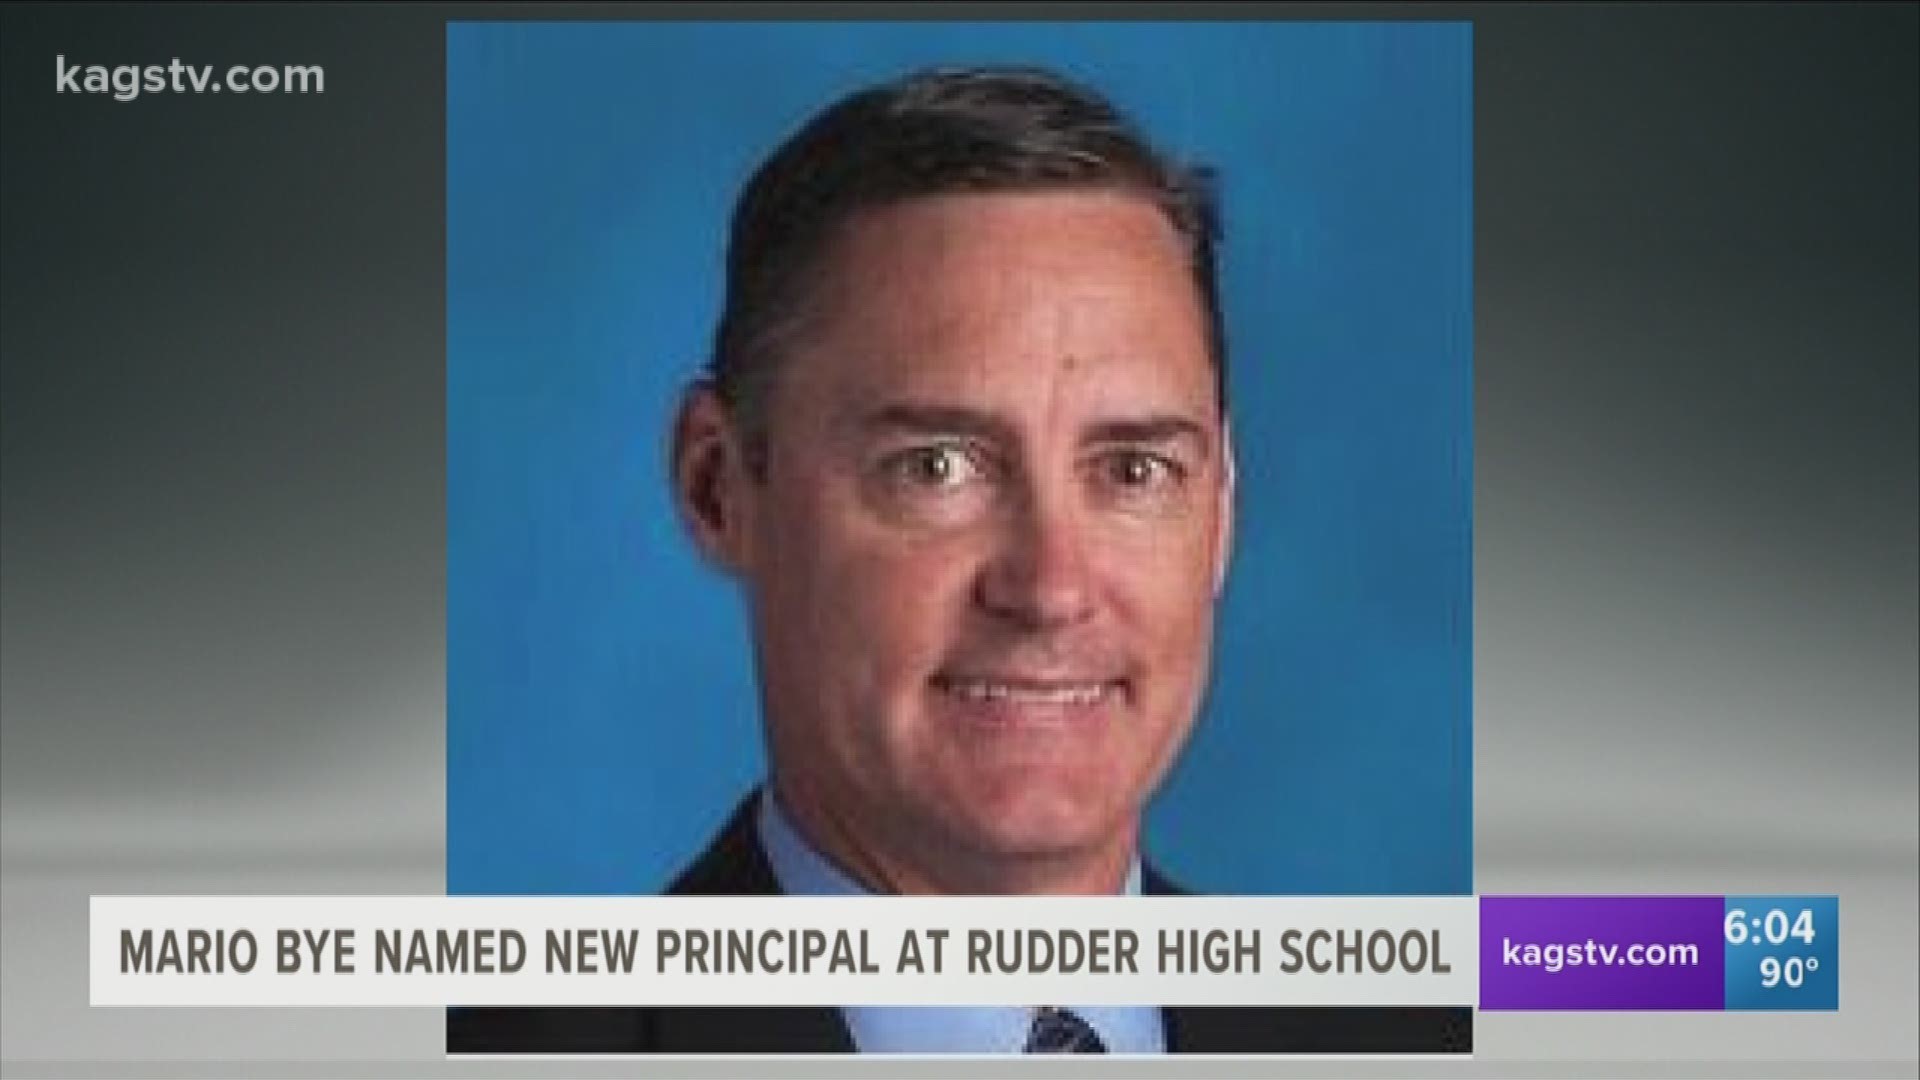 The Bryan ISD School Board announced today the hiring of a new principal at Rudder High School.